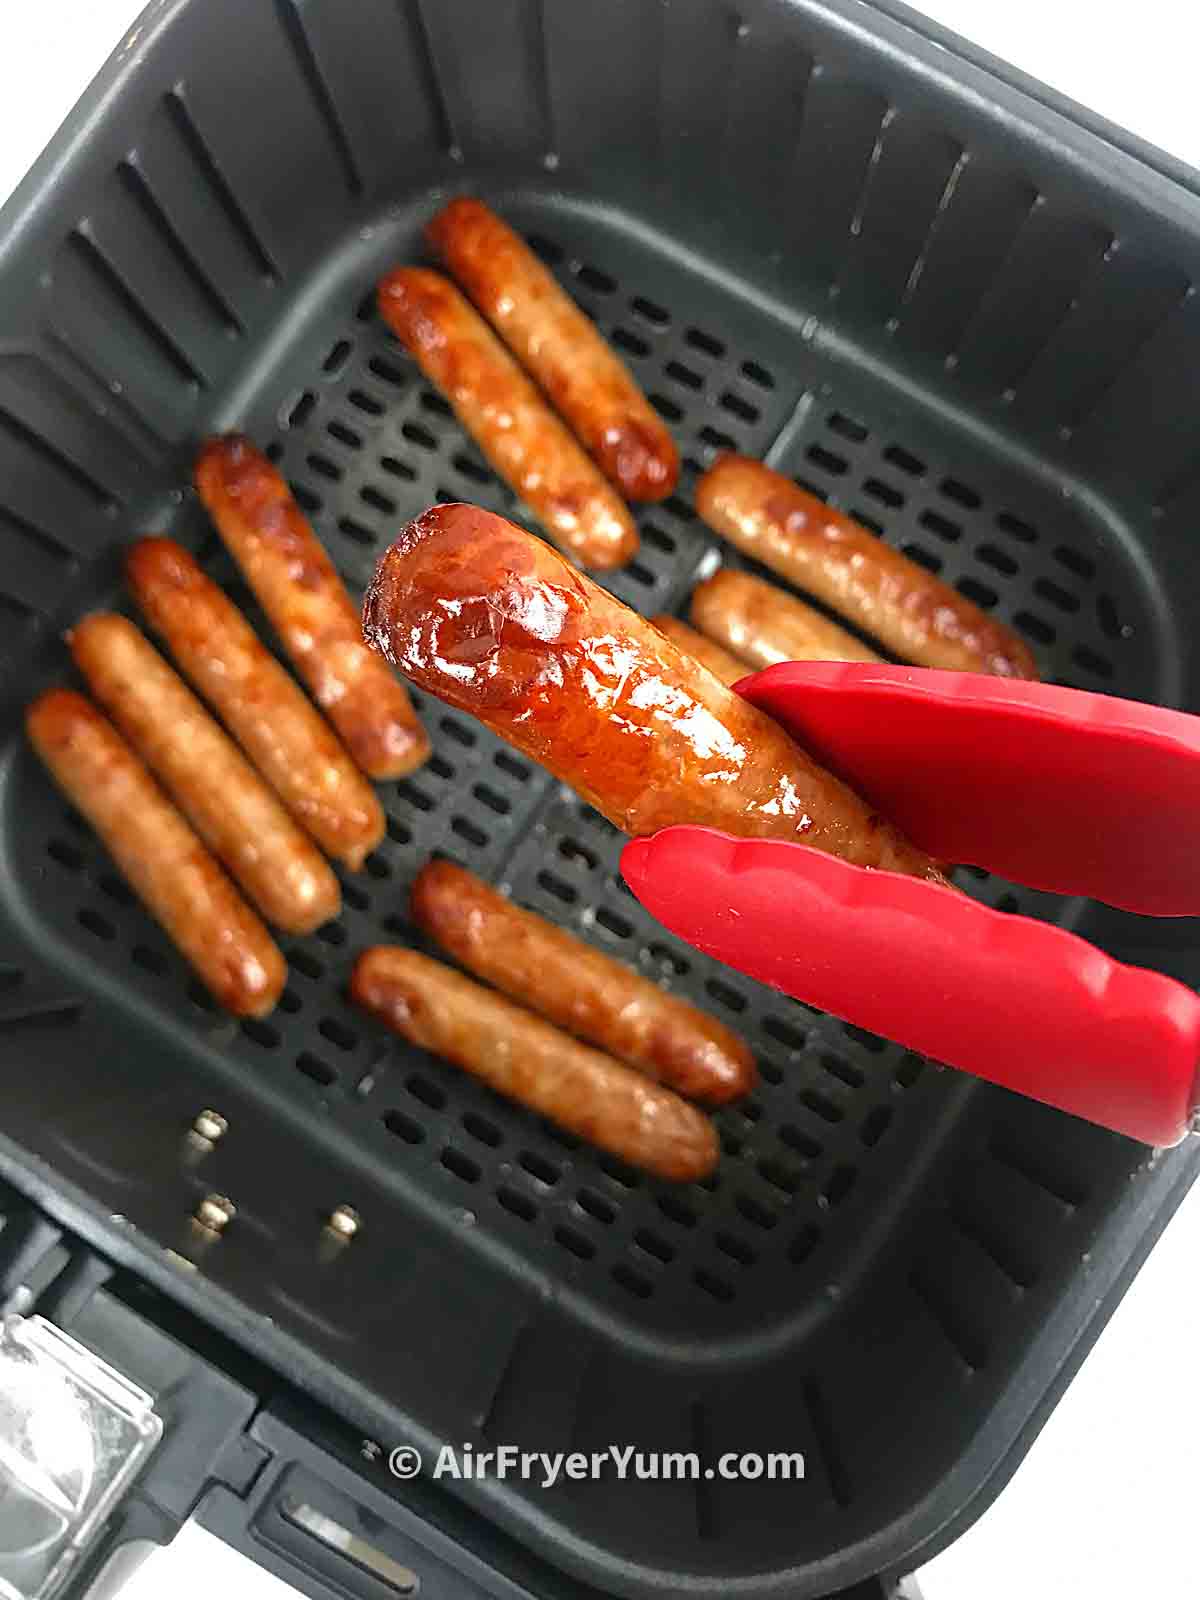 Sausage lifted up with a pair of red tipped kitchen tongs and more sausages in the air fryer basket at the background 